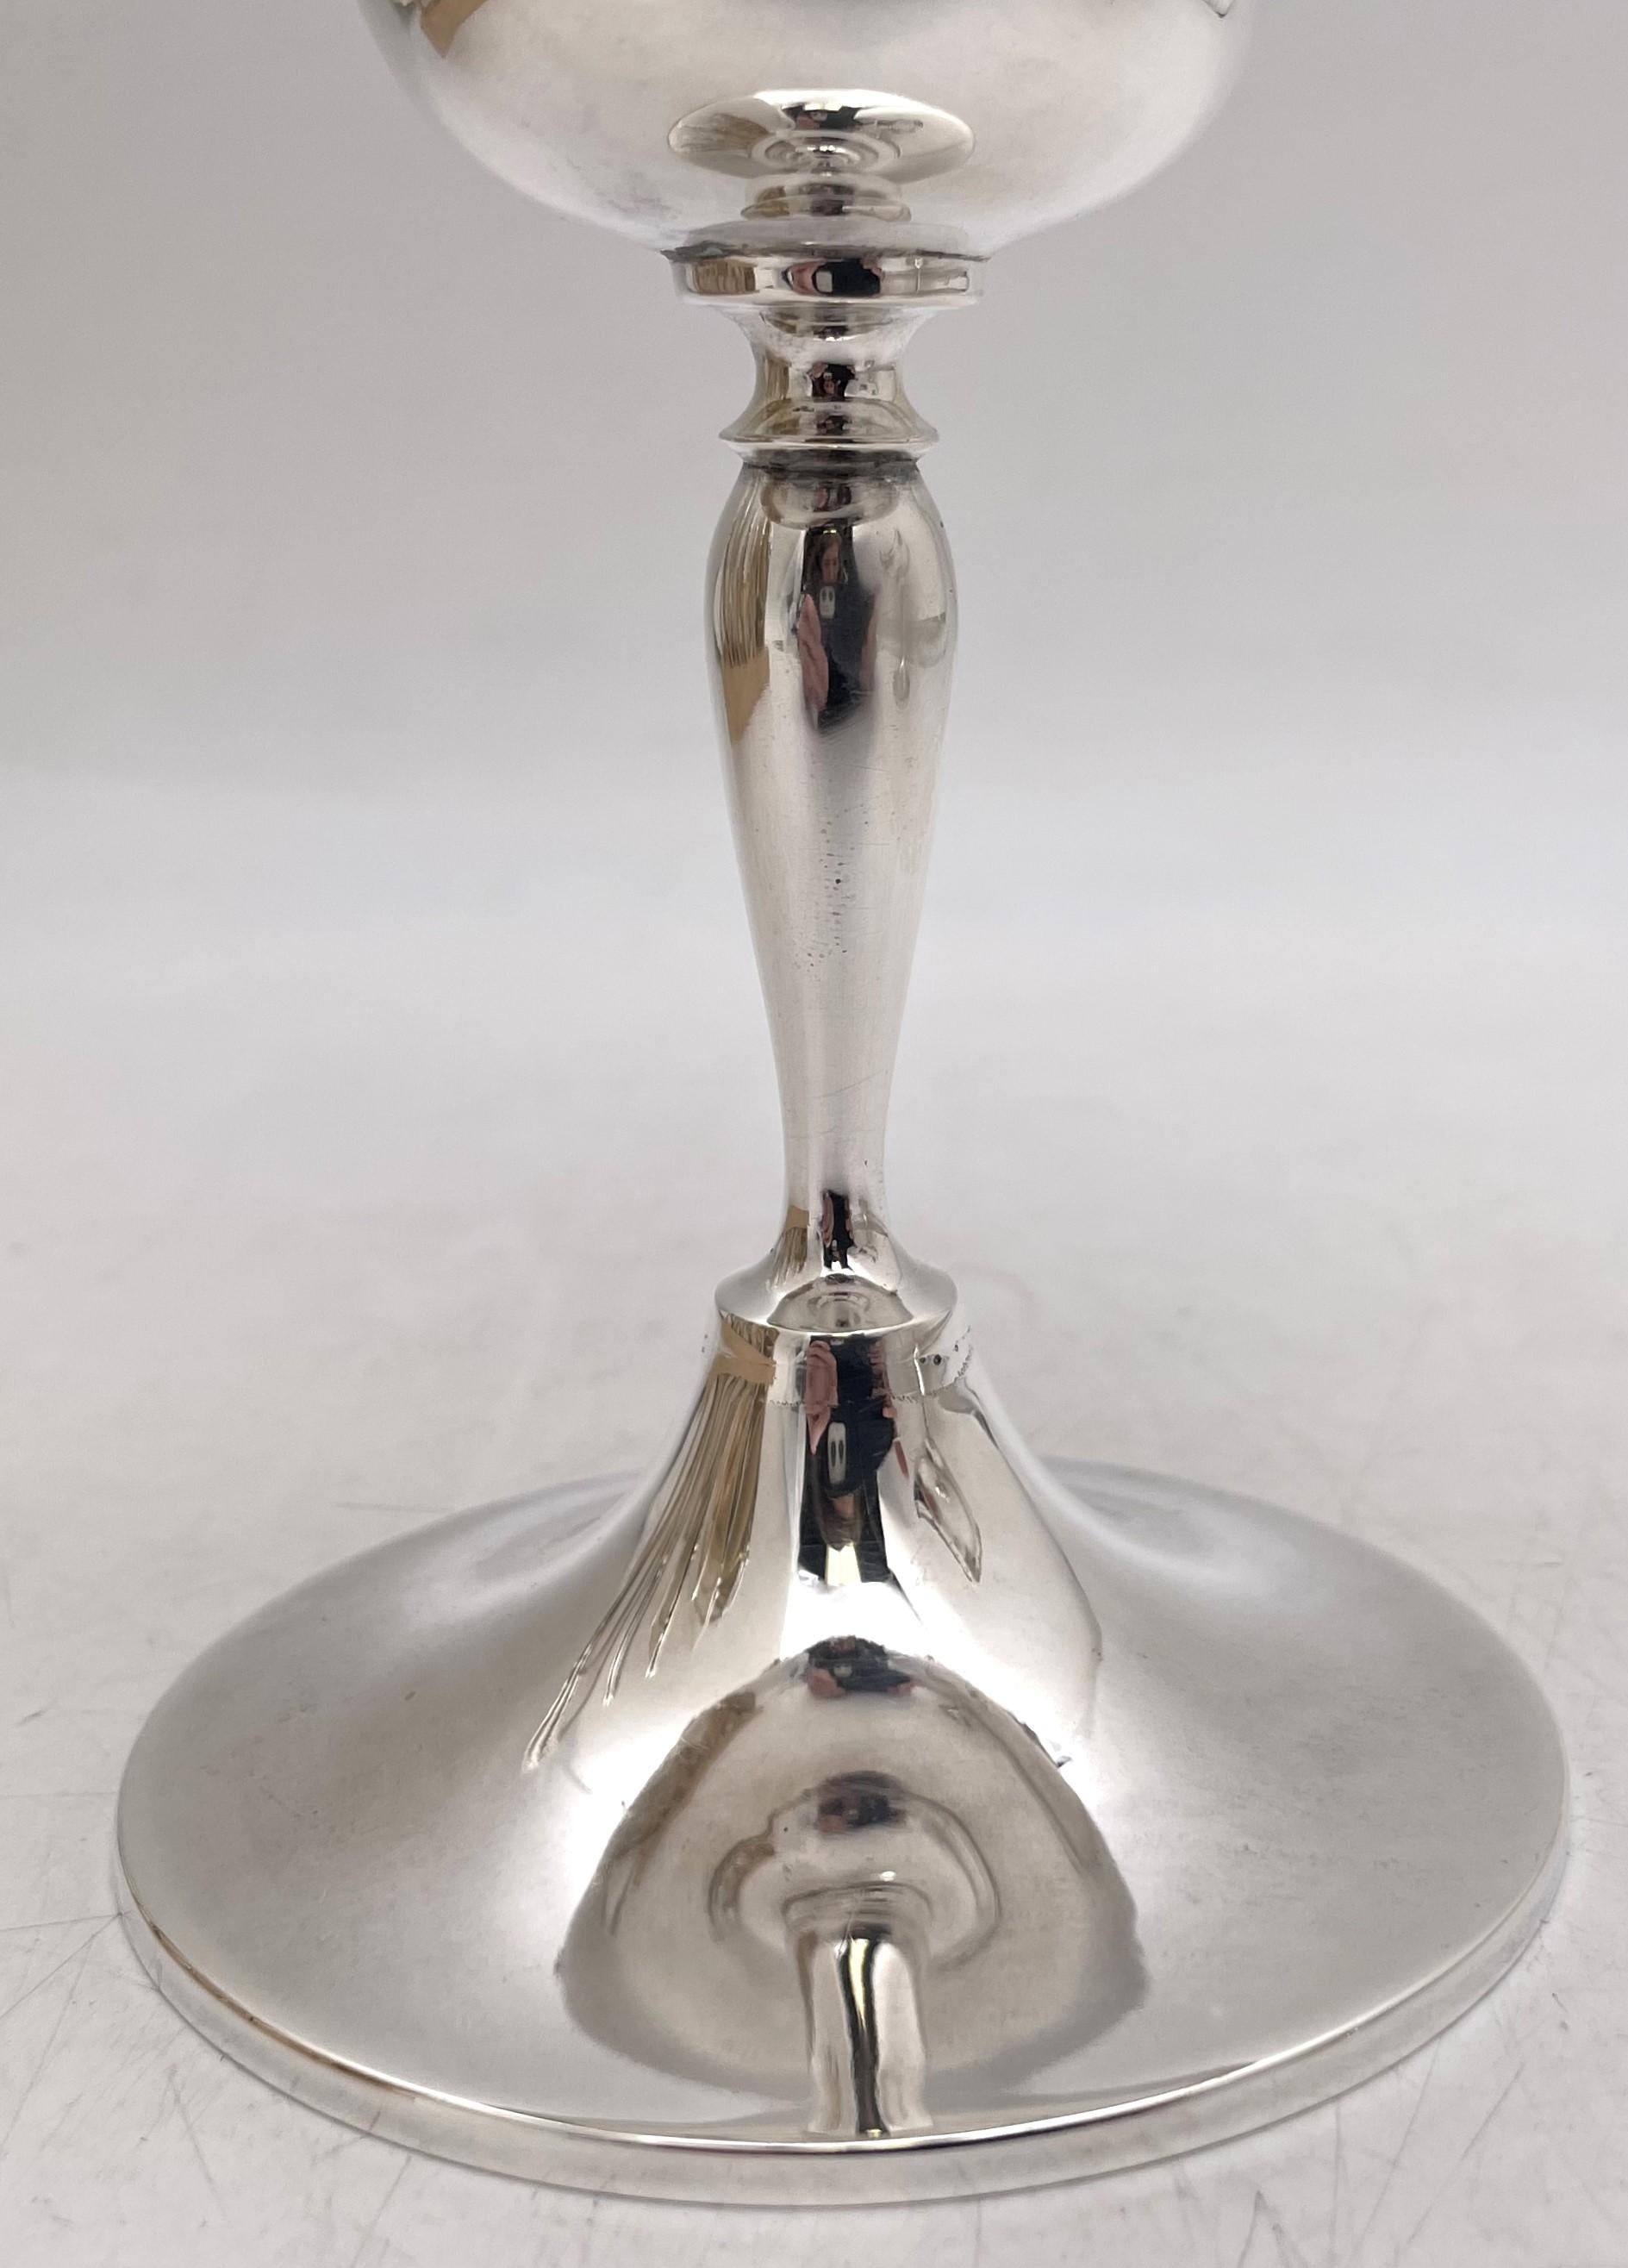 Pair of Goldsmiths & Silversmiths Sterling Silver 1910 Compotes or Footed Bowls For Sale 1